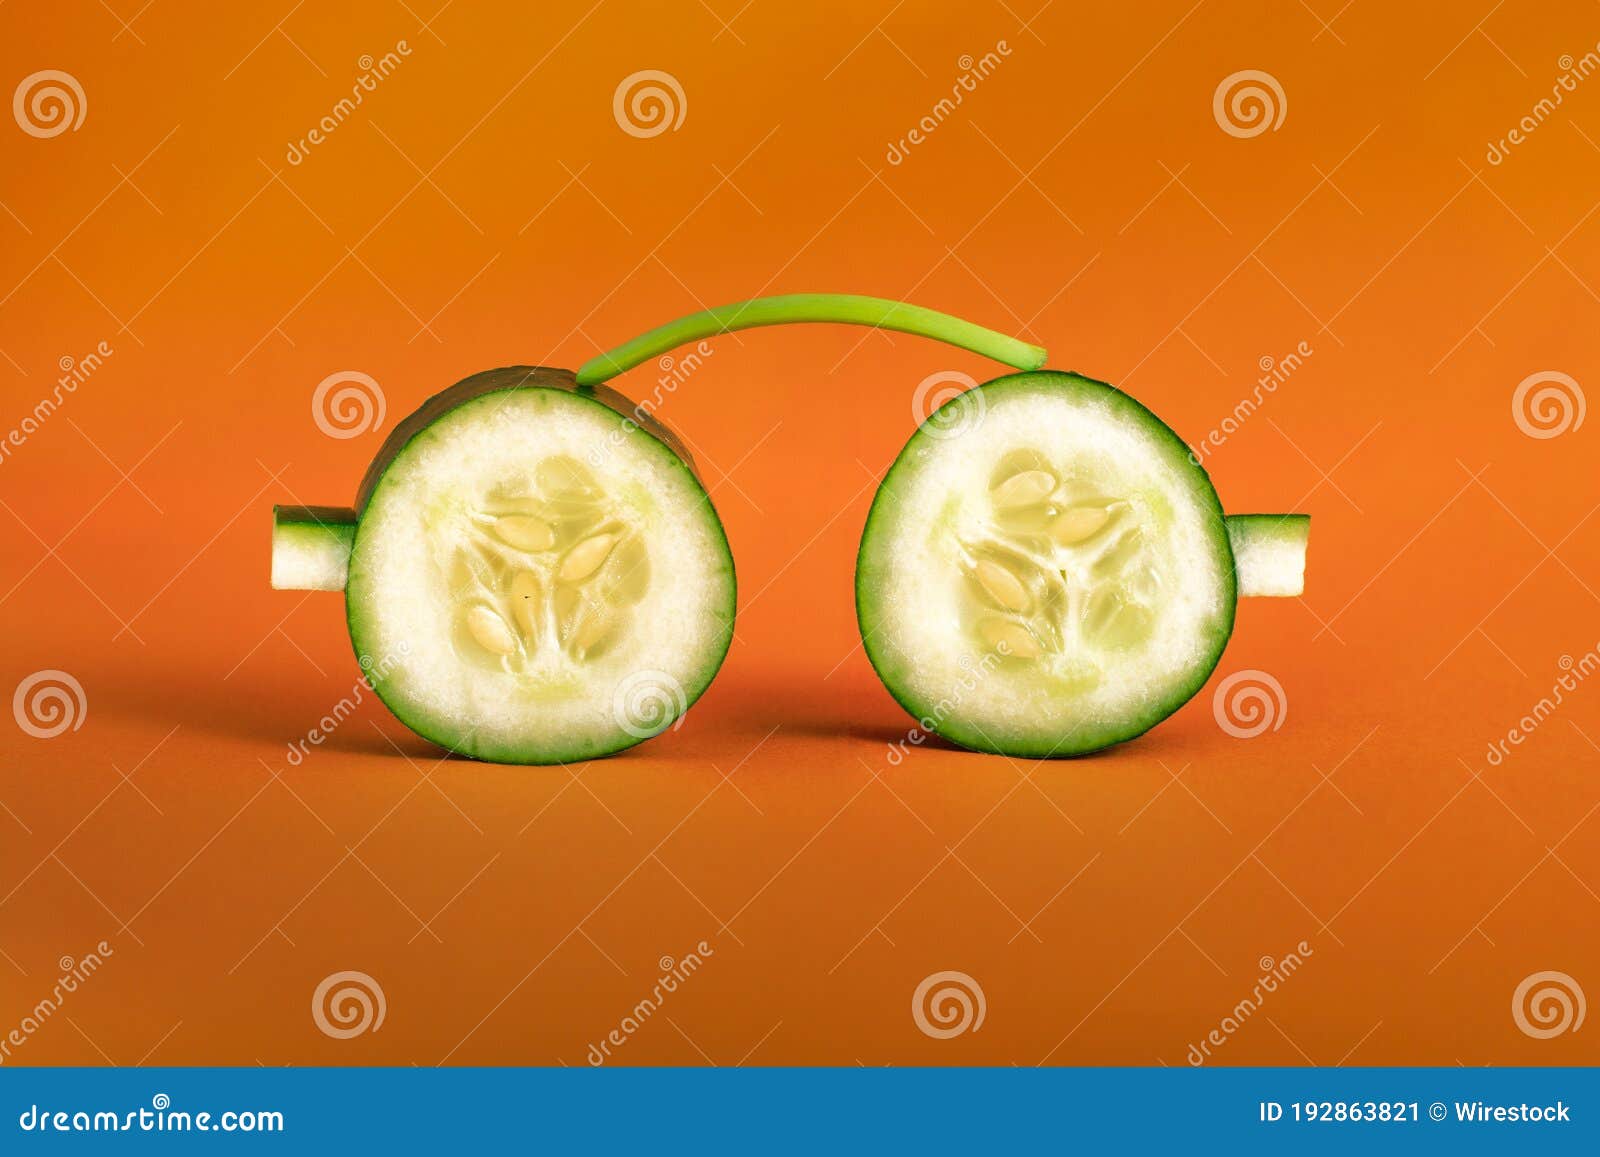 Sunglasses Created With Cucumber On An Orange Background Stock Image